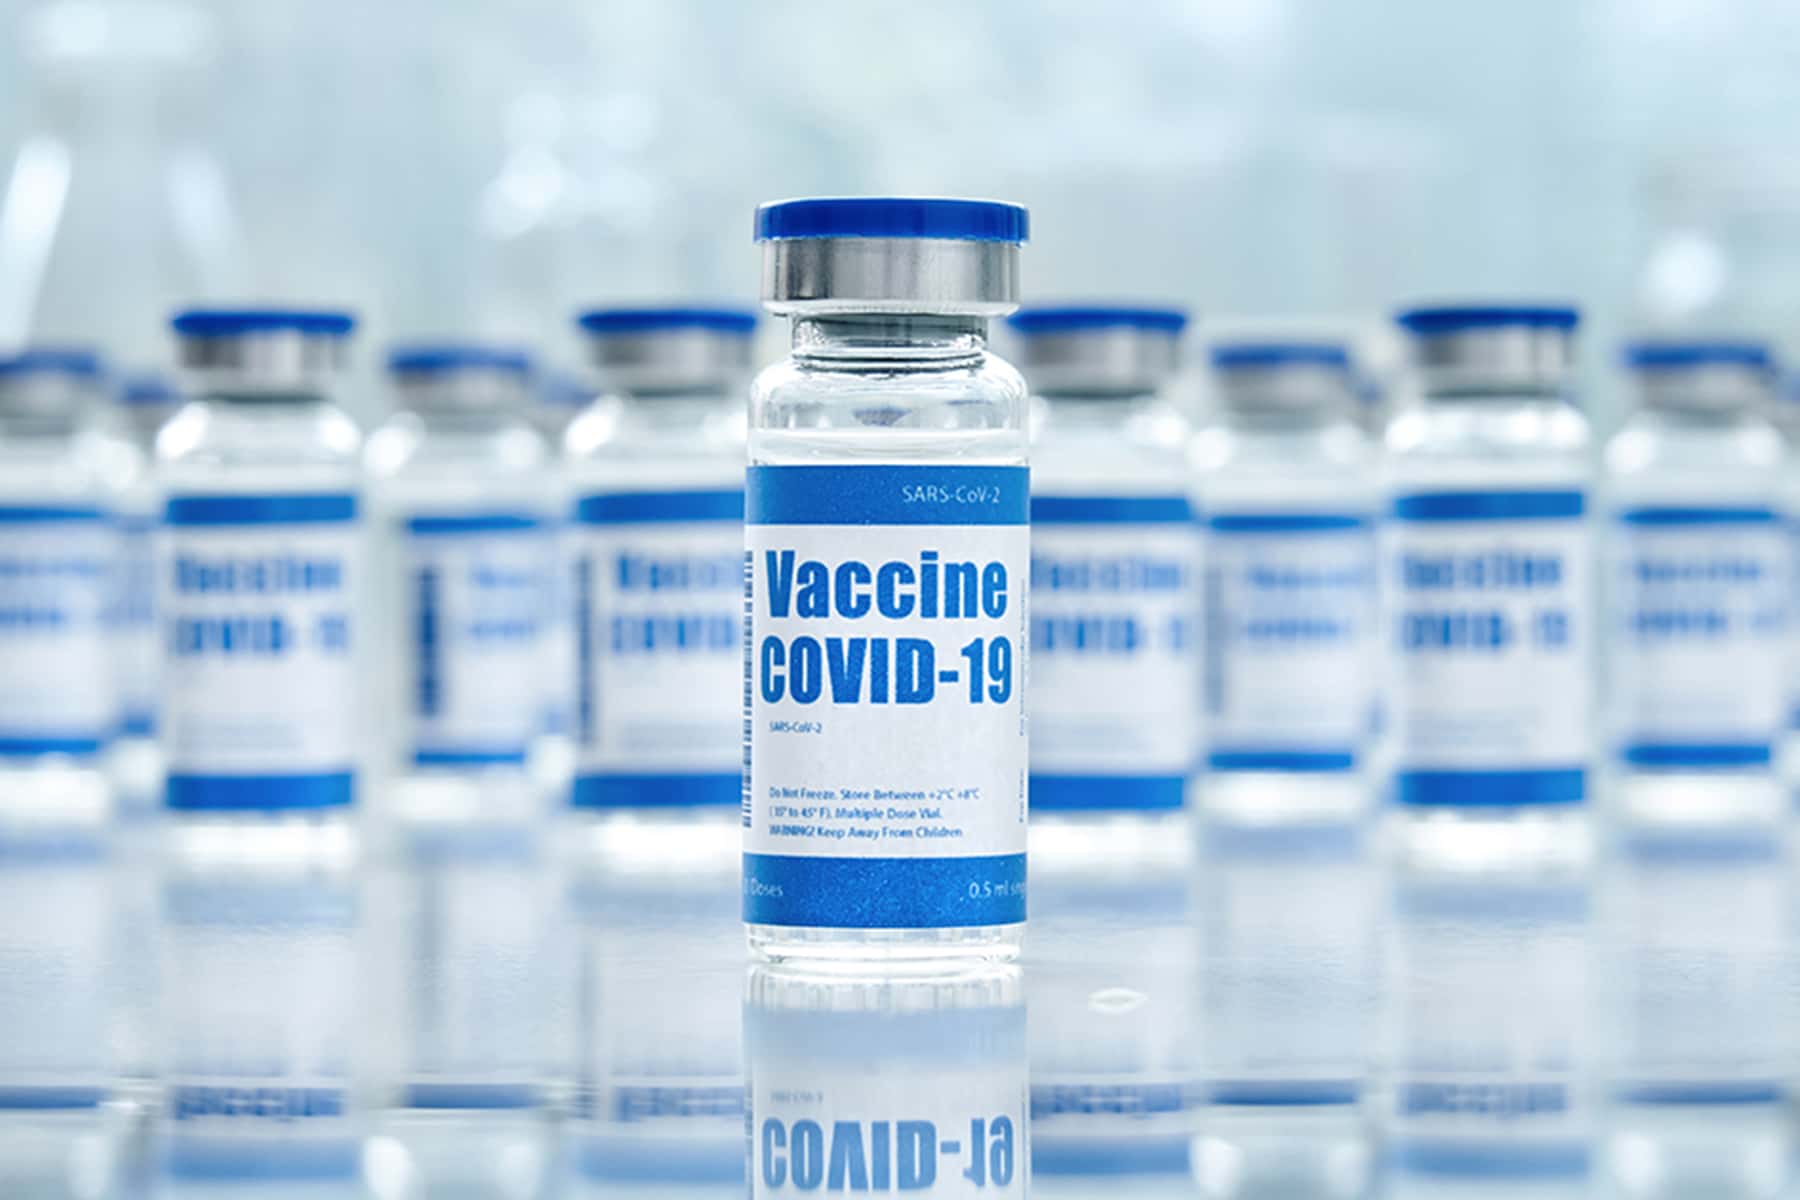 123120_vaccinedelivery_02